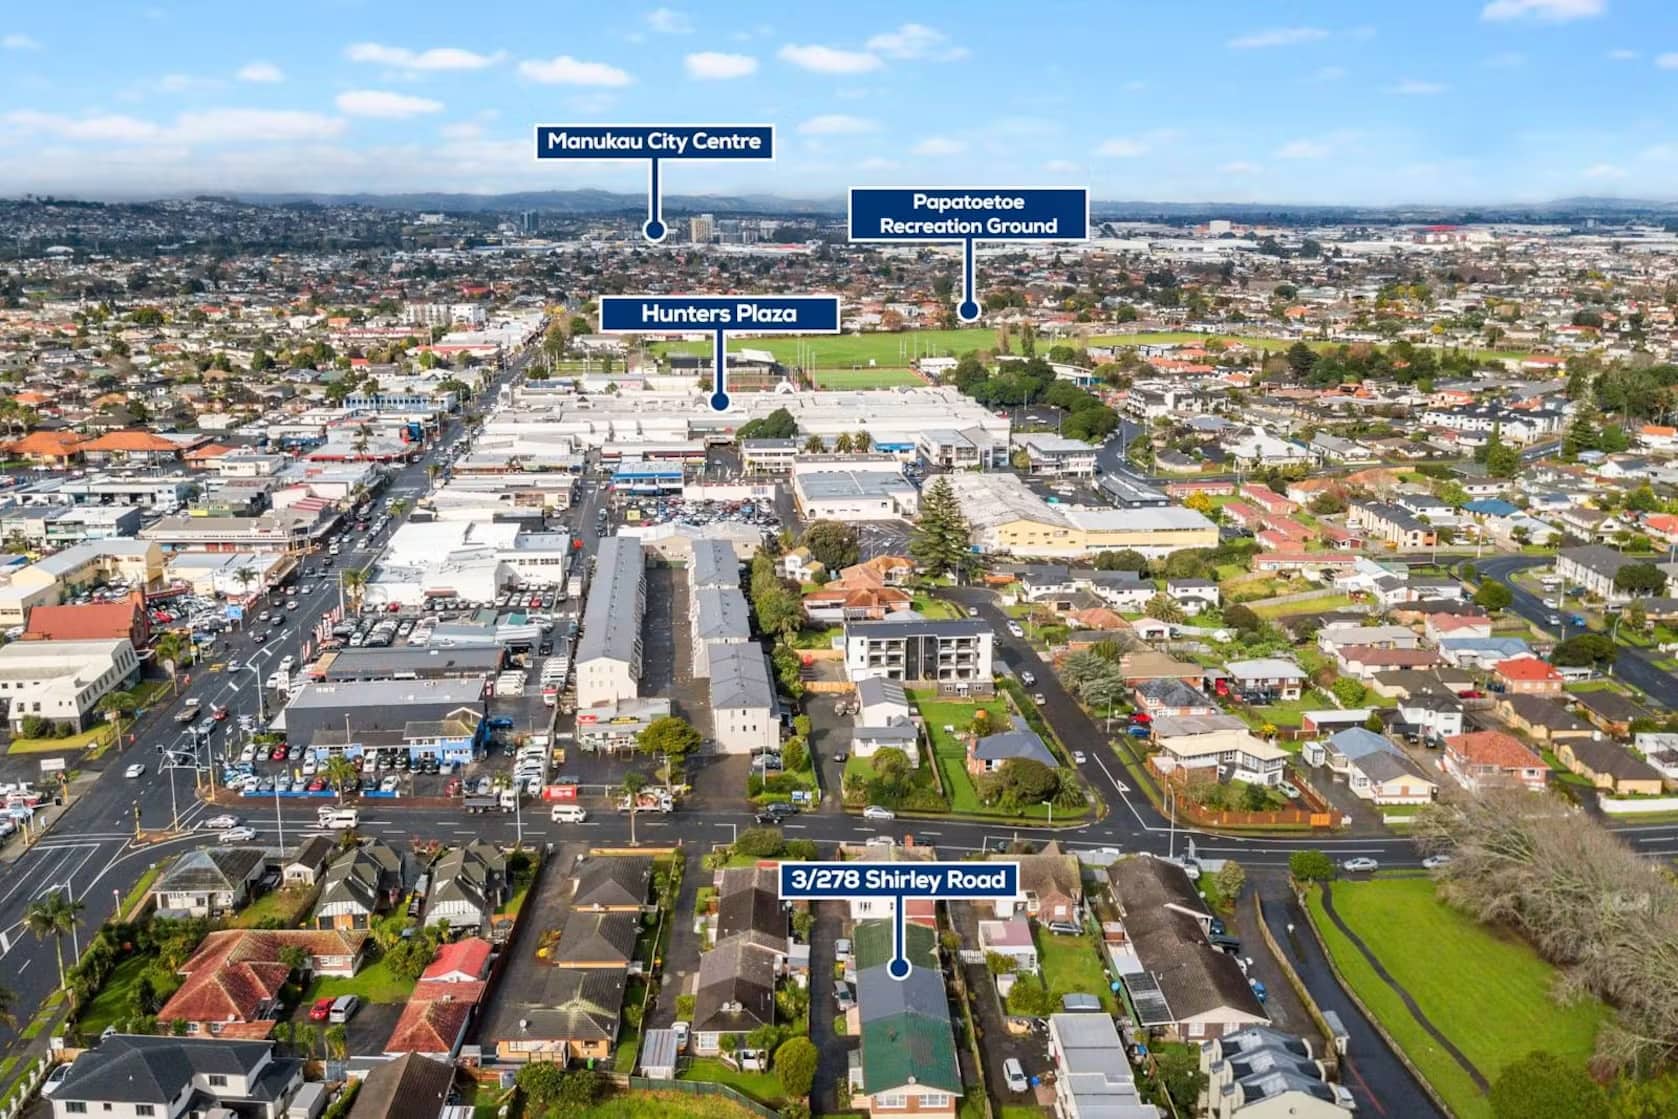 Mose-Real-Estate-Properties-for-sale-3-278-shirley-road-papatoetoe-15